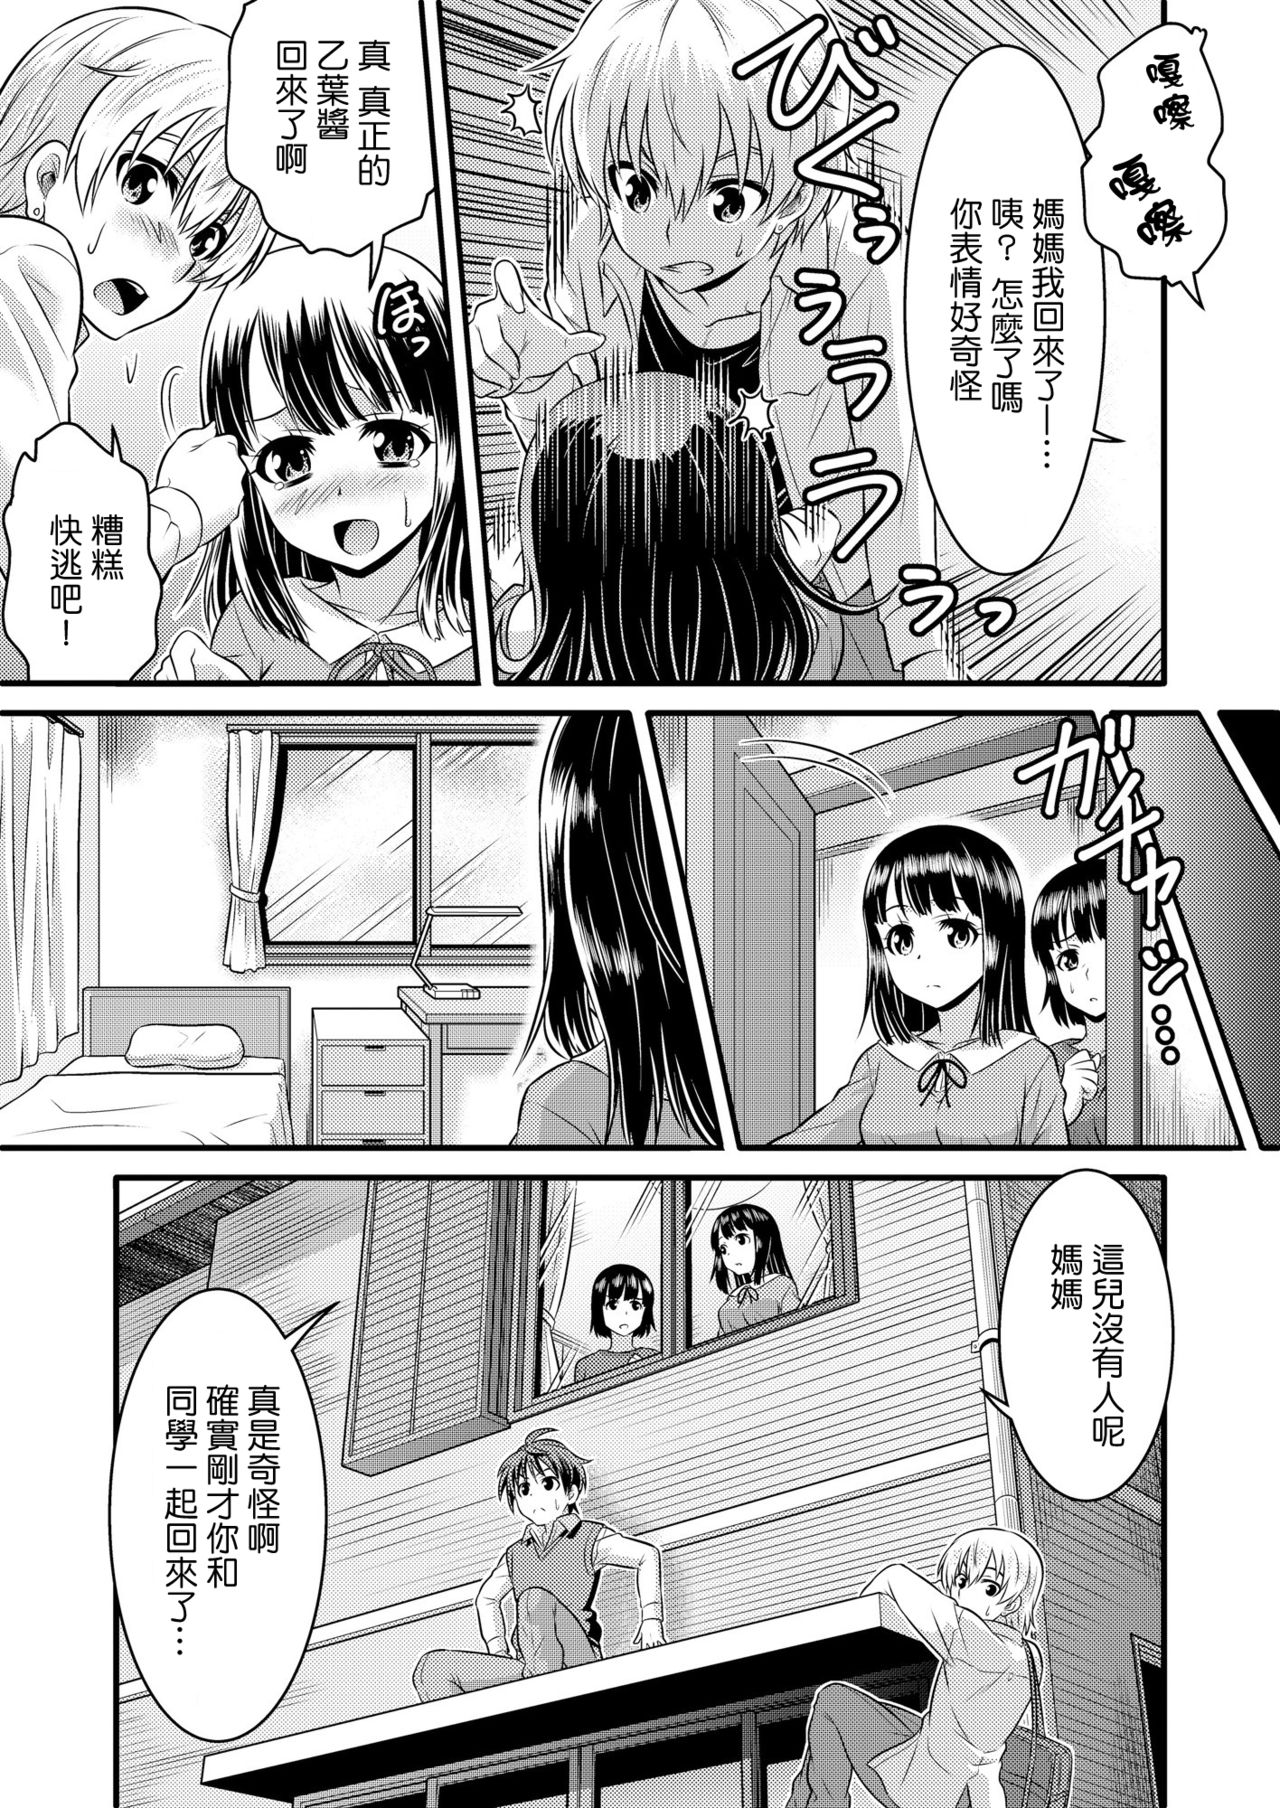 Metamorph ★ Coordination - I Become Whatever Girl I Crossdress As~ [Sister Arc, Classmate Arc] [Chinese] [瑞树汉化组] page 32 full